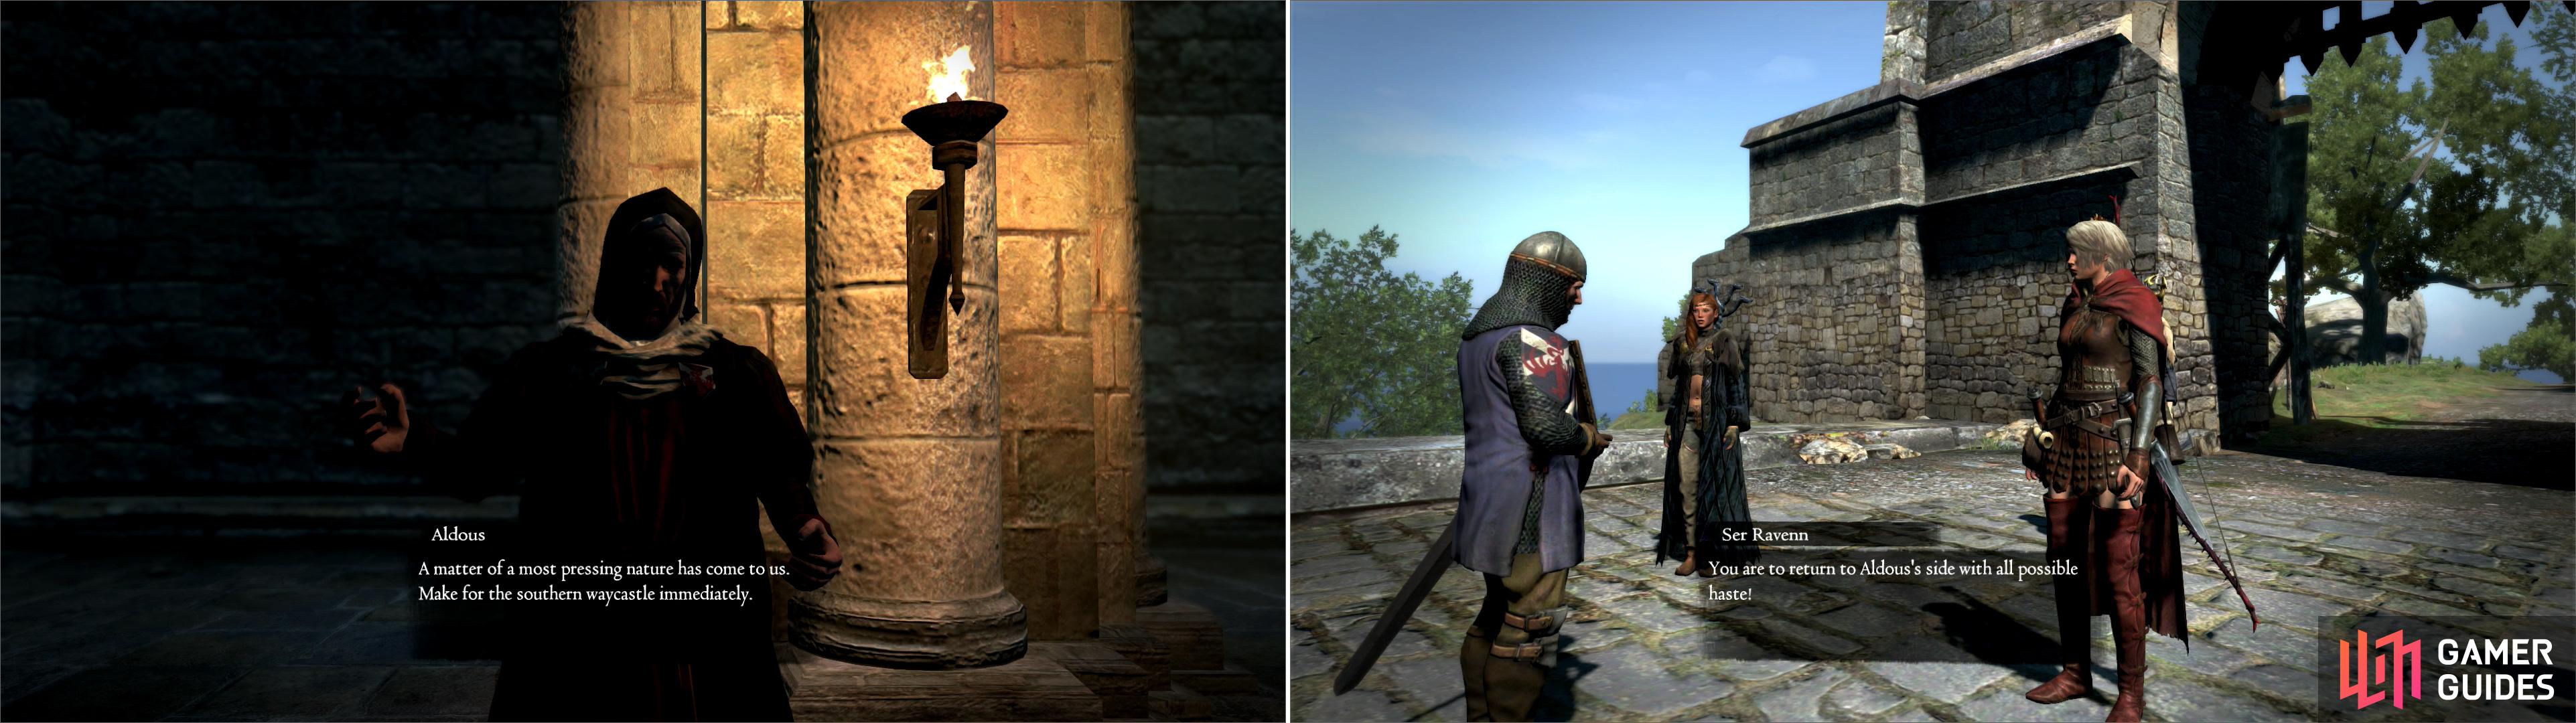 Accept Aldous’s next task (left) only to get the run-around when you reach the Mountain Waycastle (right).